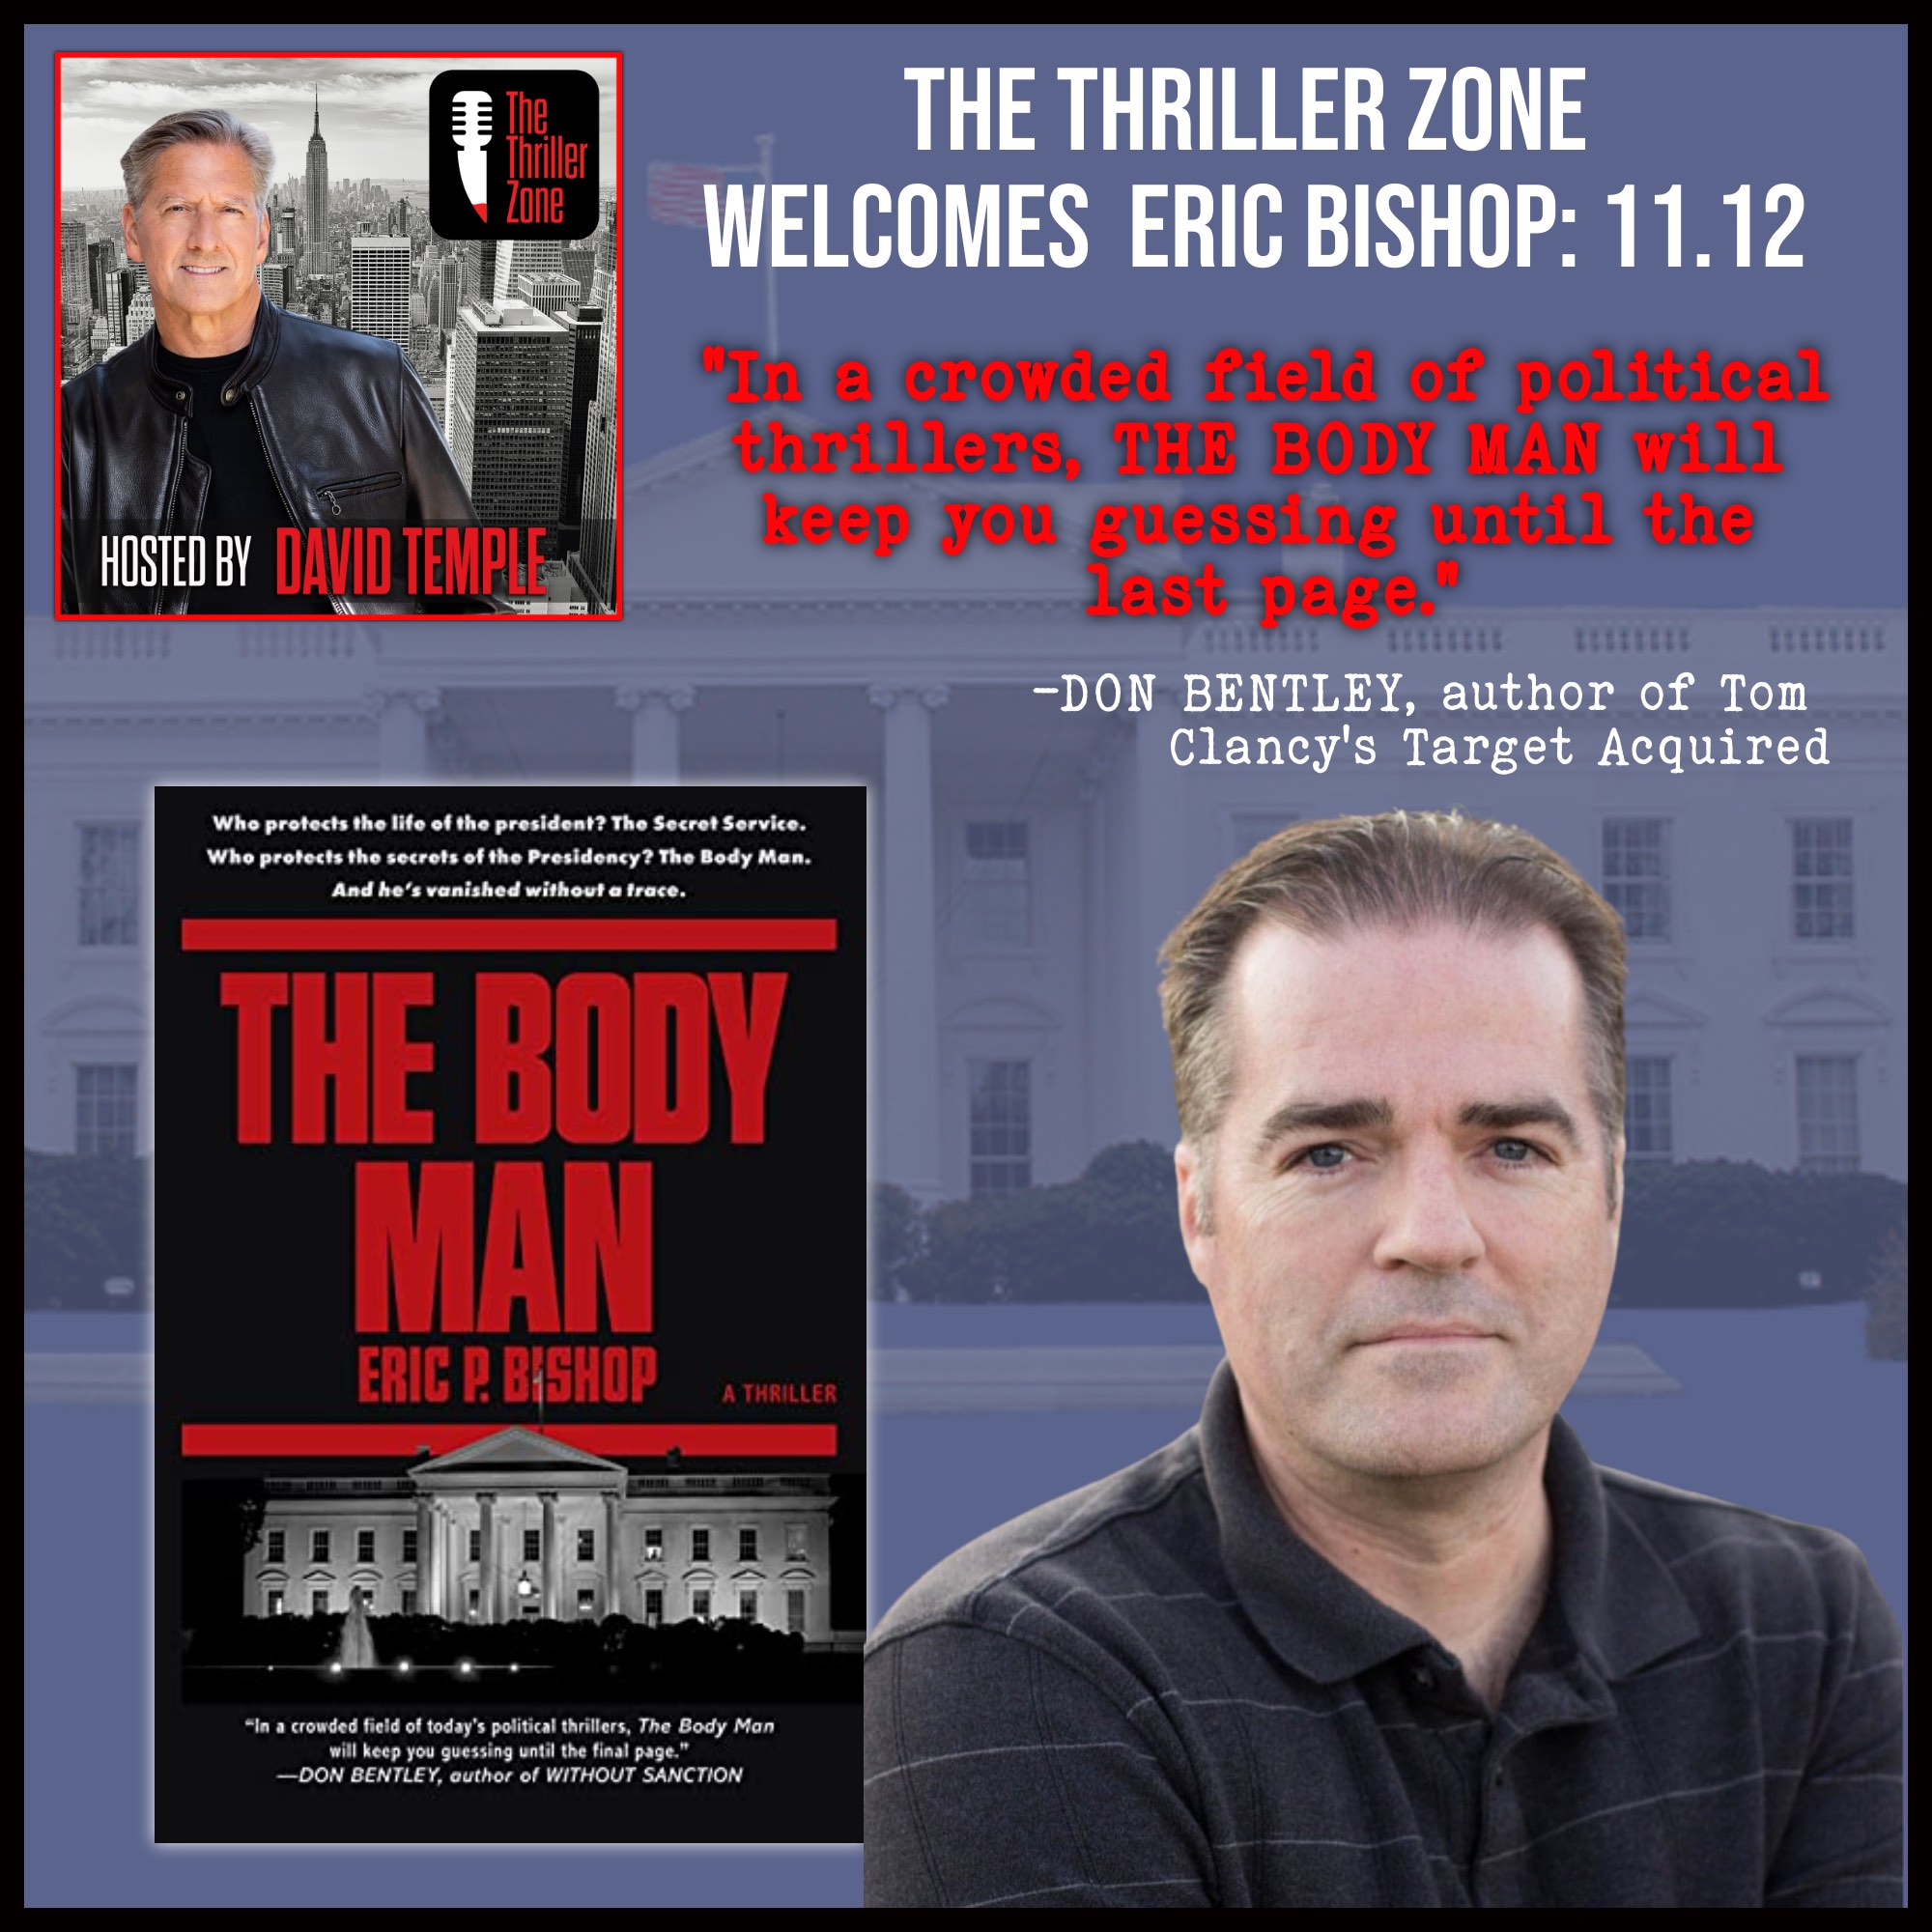 Eric Bishop Thriller Author of The Body Man Image